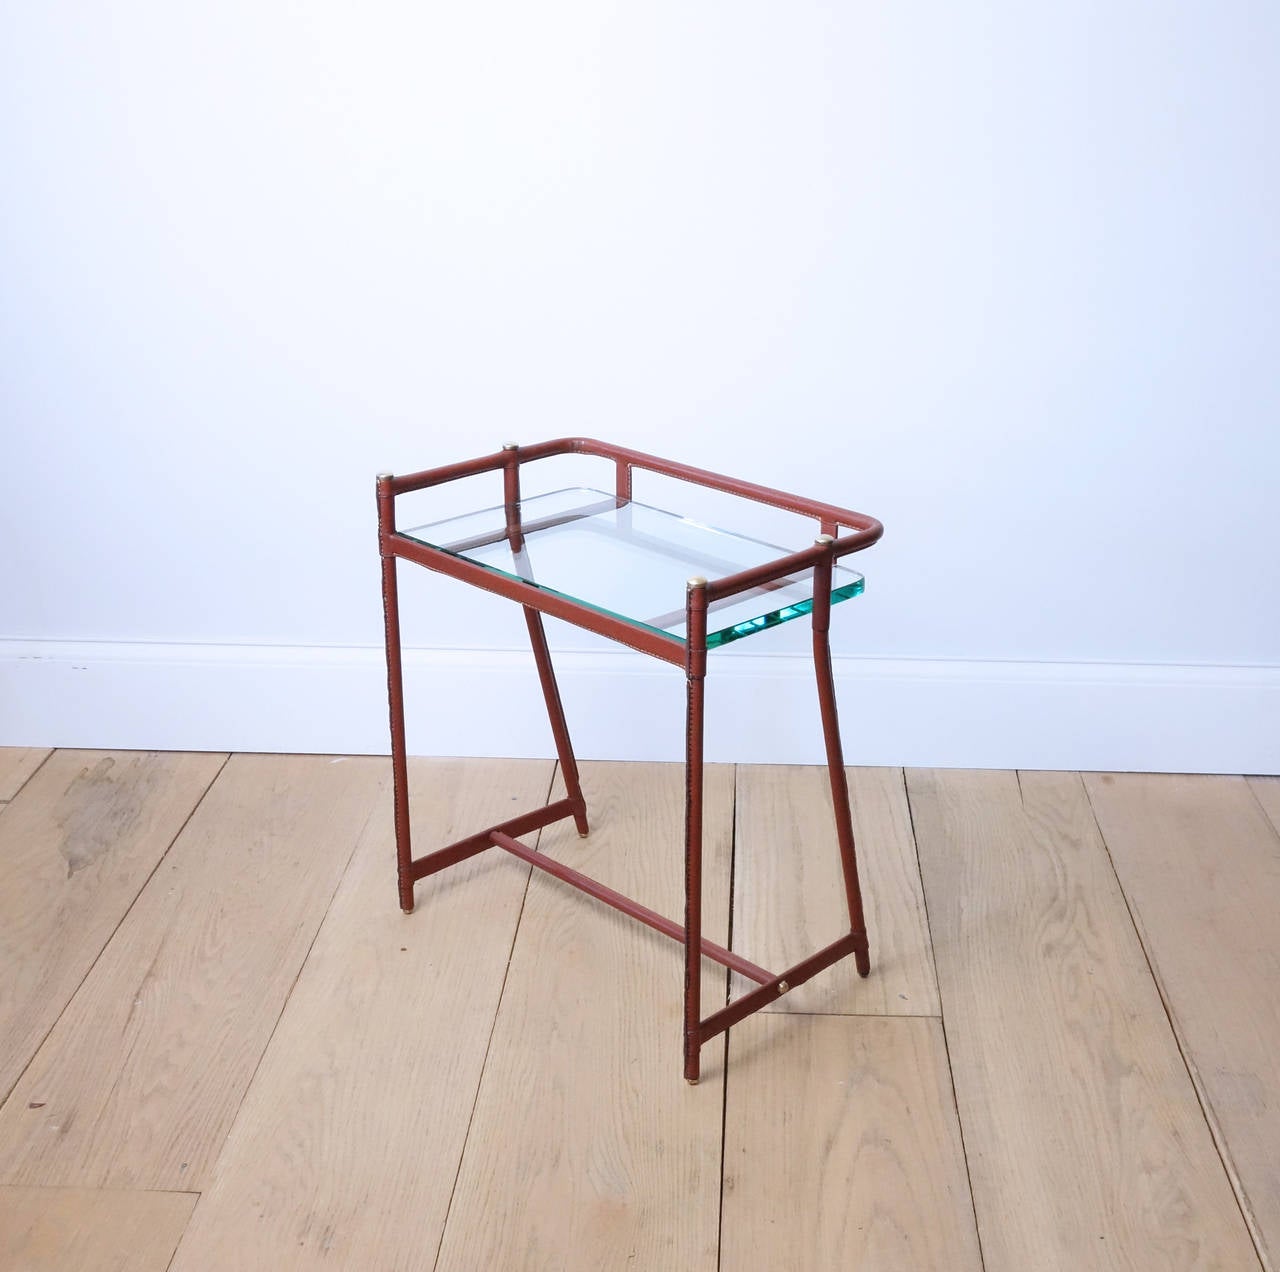 A stylish side table, perfect for mail and keys or a small bar. The leather is original, and has aged well. Glass is new.